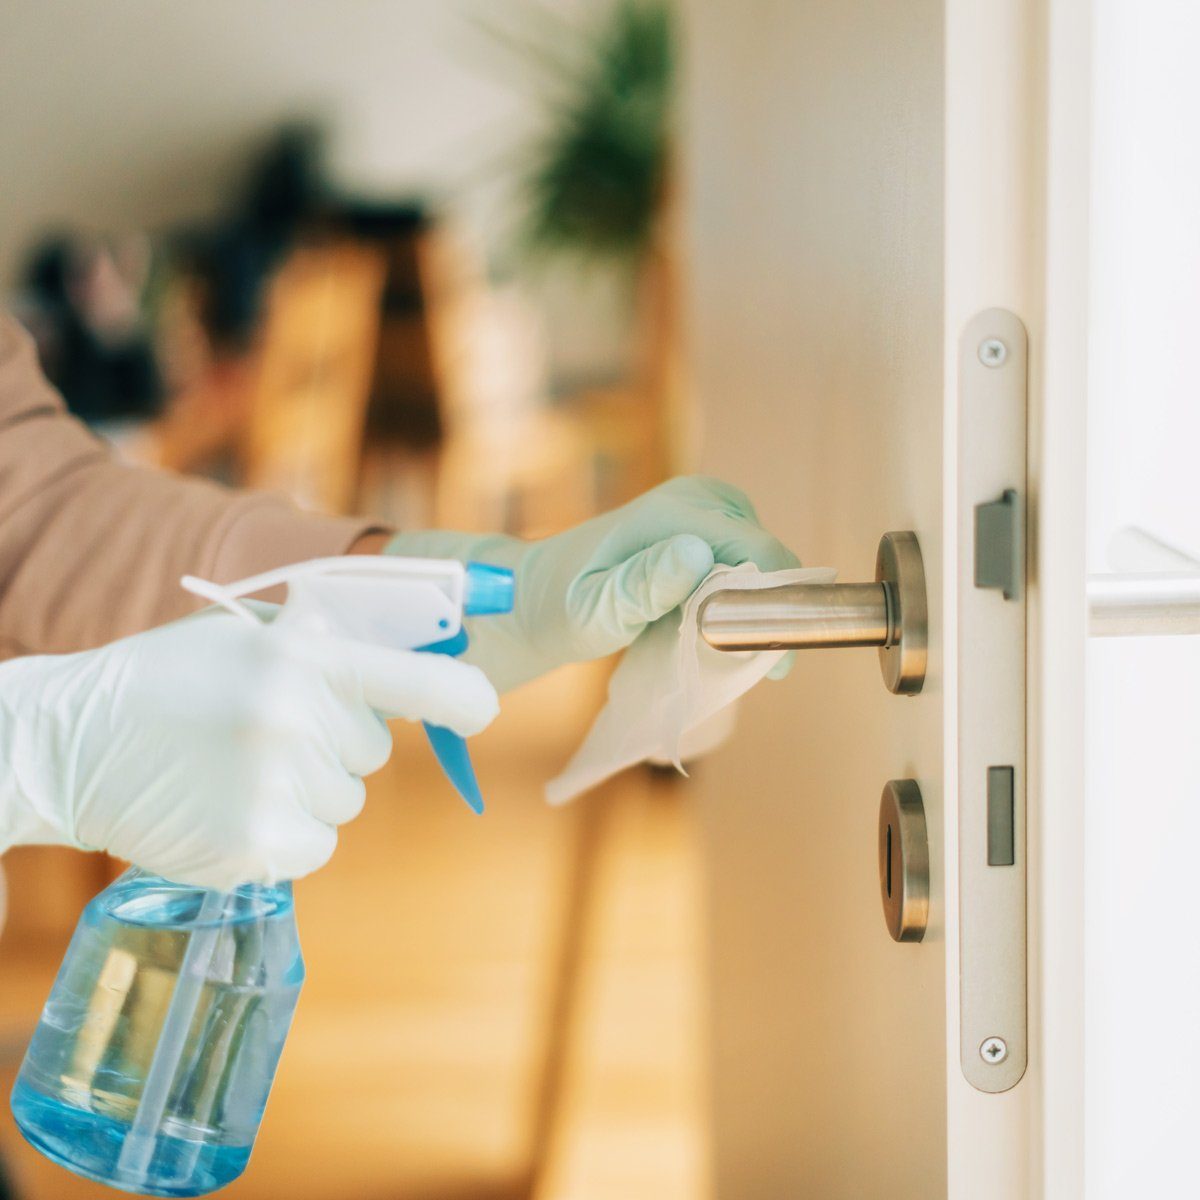 Woman cleaning a door handle with a disinfection spray and disposable wipe